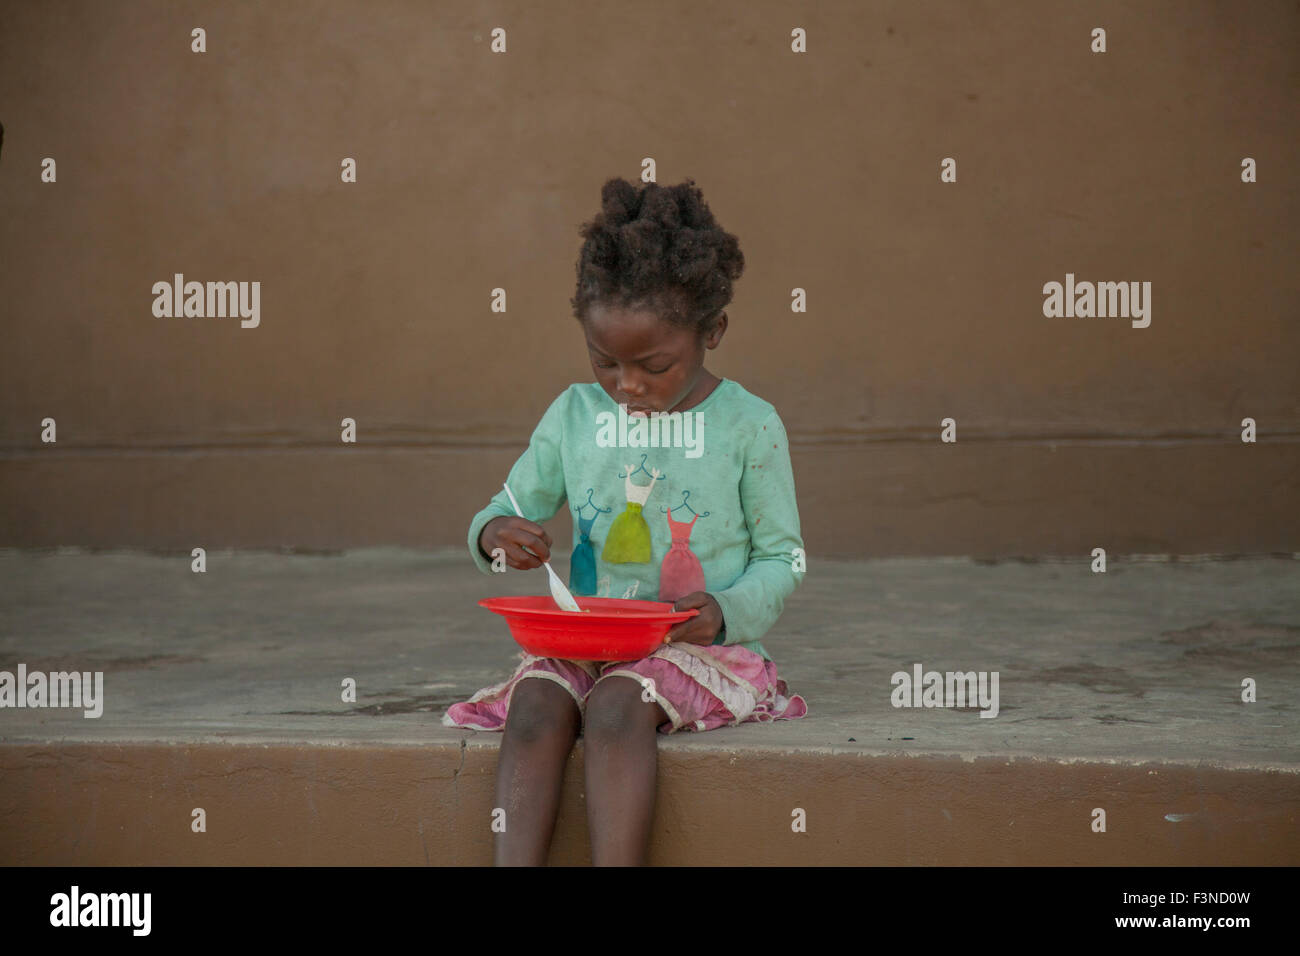 African girl sitting wile eating food given by malnutrition program. Stock Photo